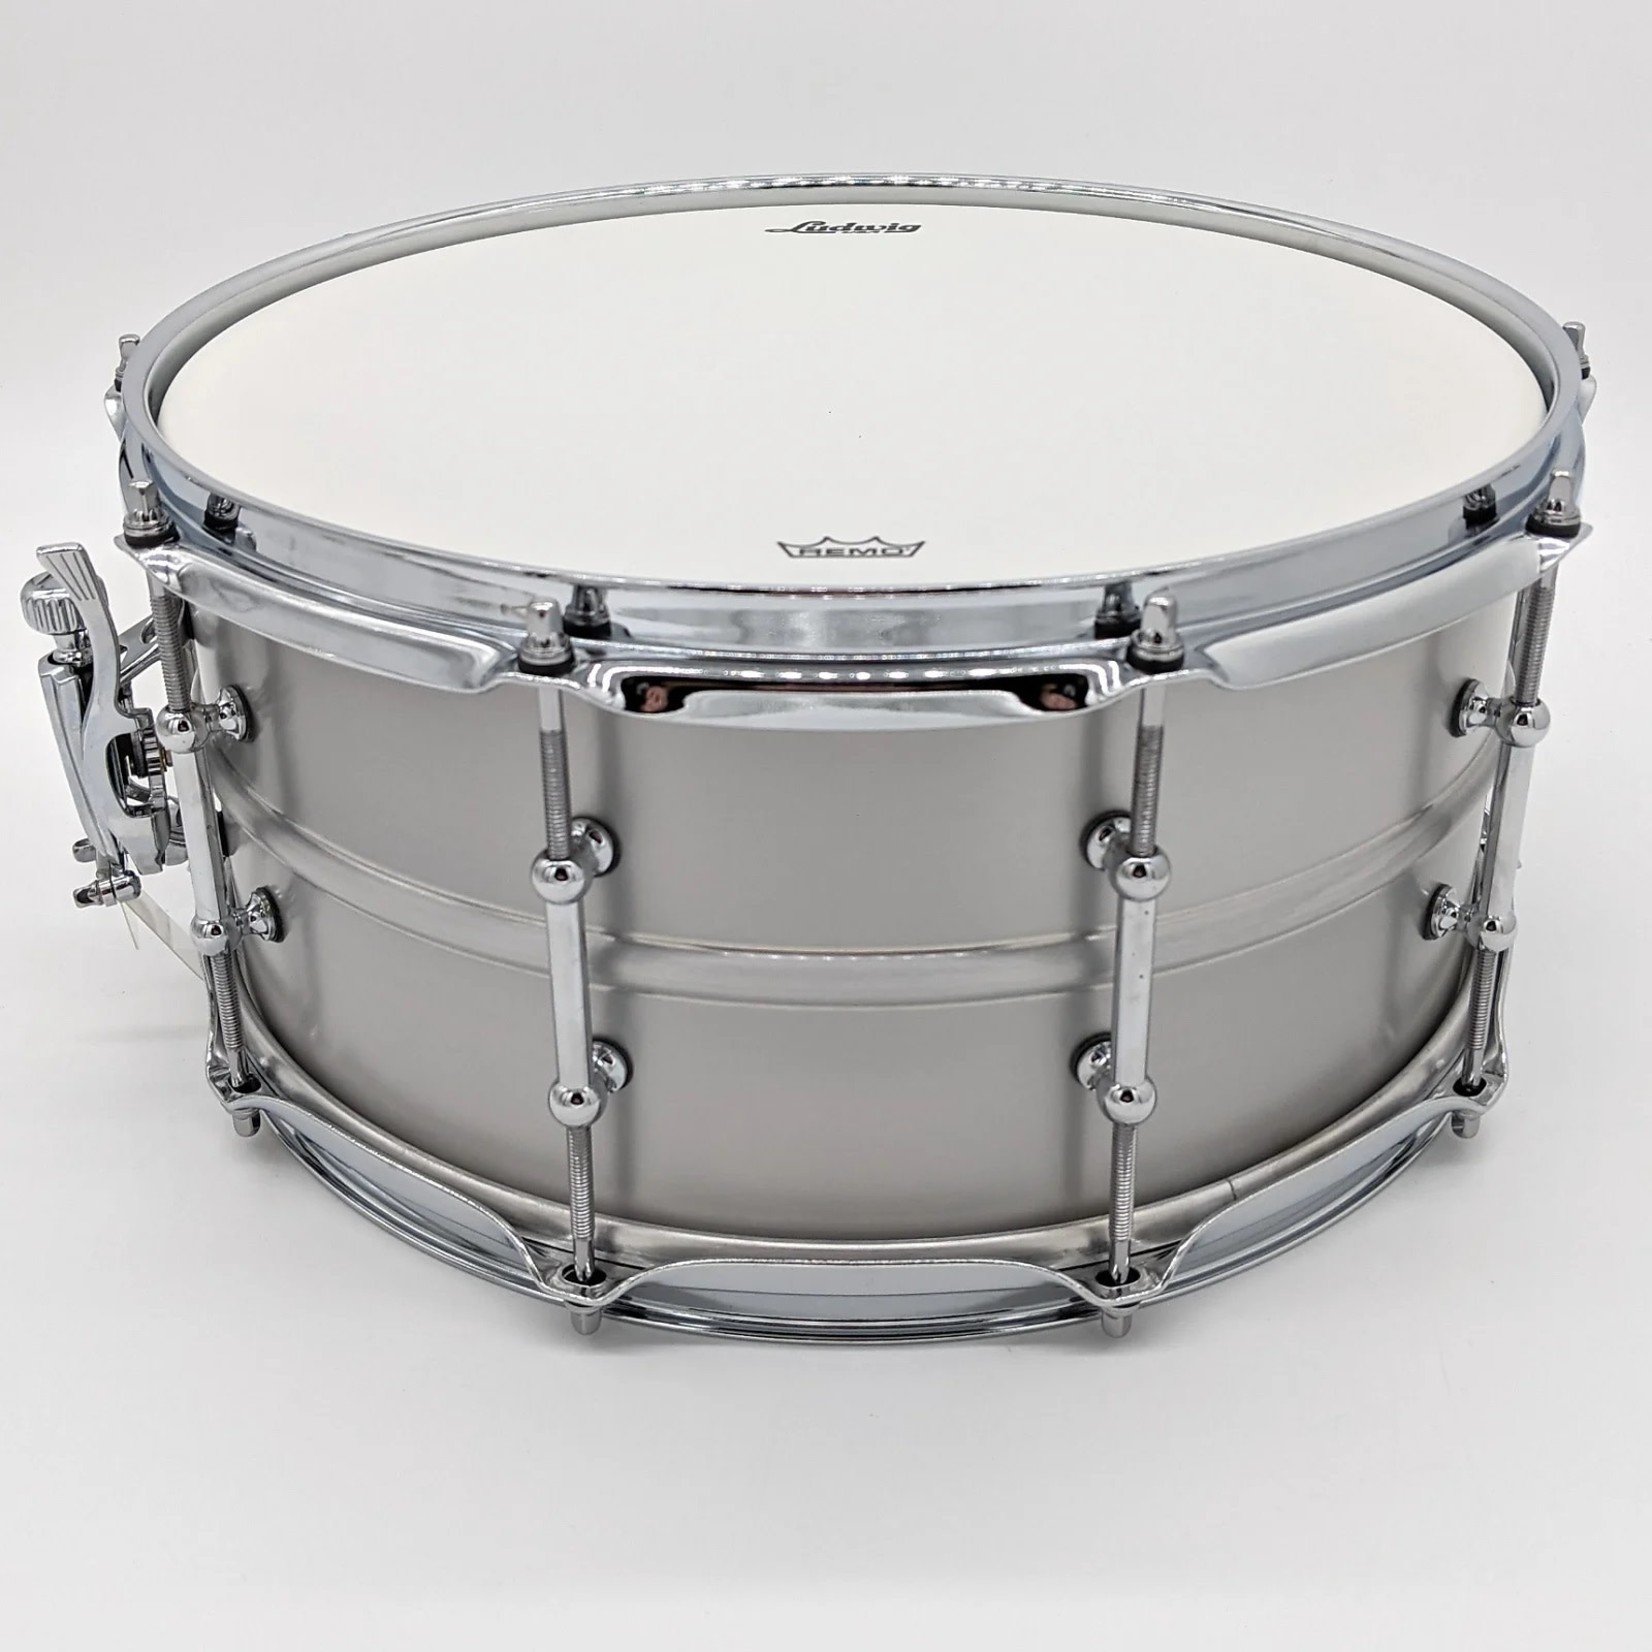 Ludwig Ludwig 6.5x14" Acrolite Snare Drum With Tube Lugs LM405CT